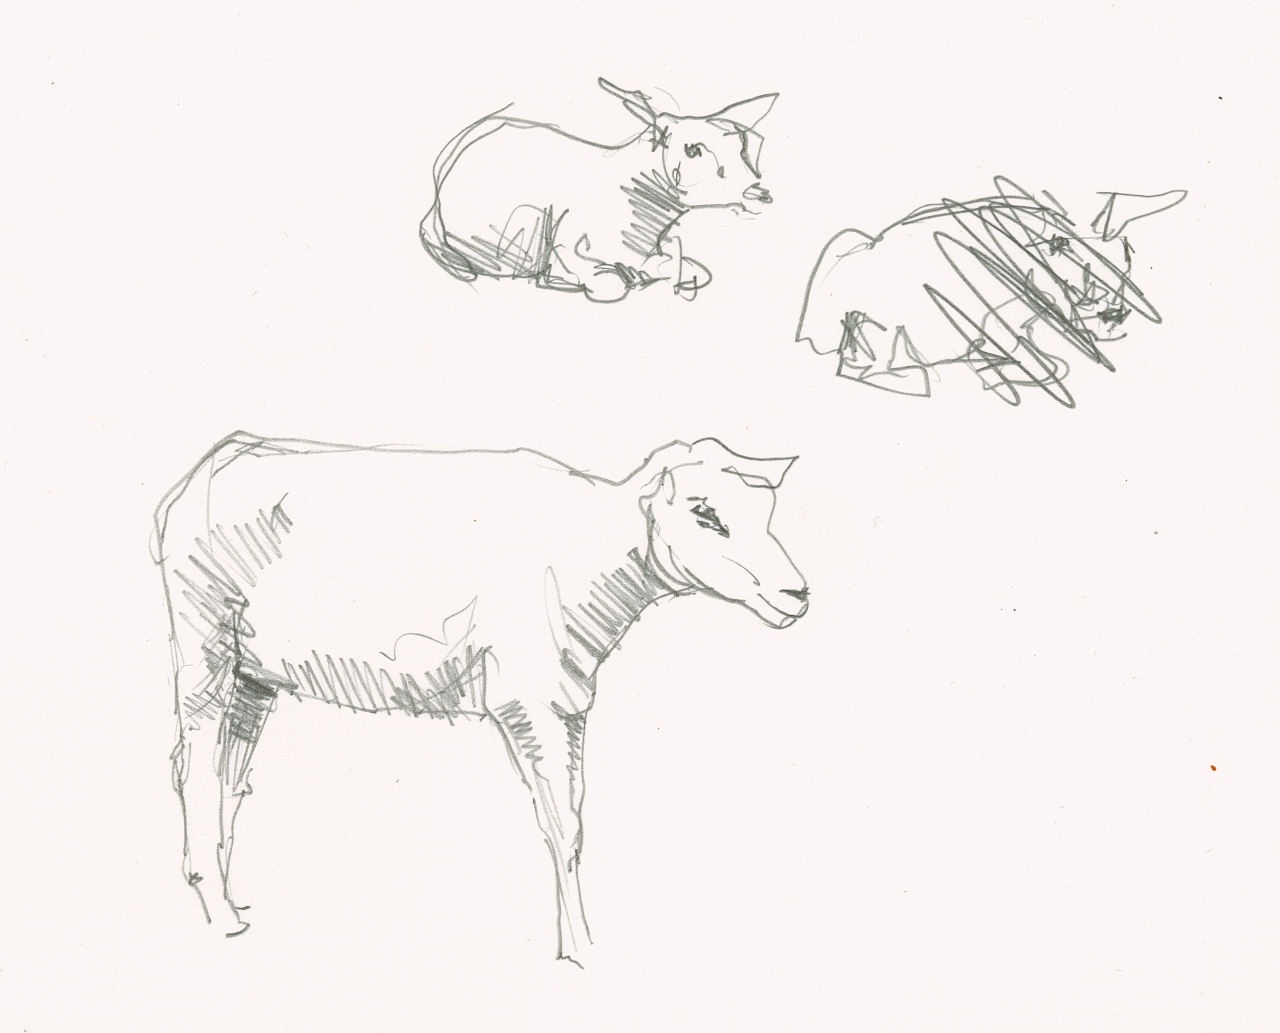 Three sketches of sheep, one crossed out.